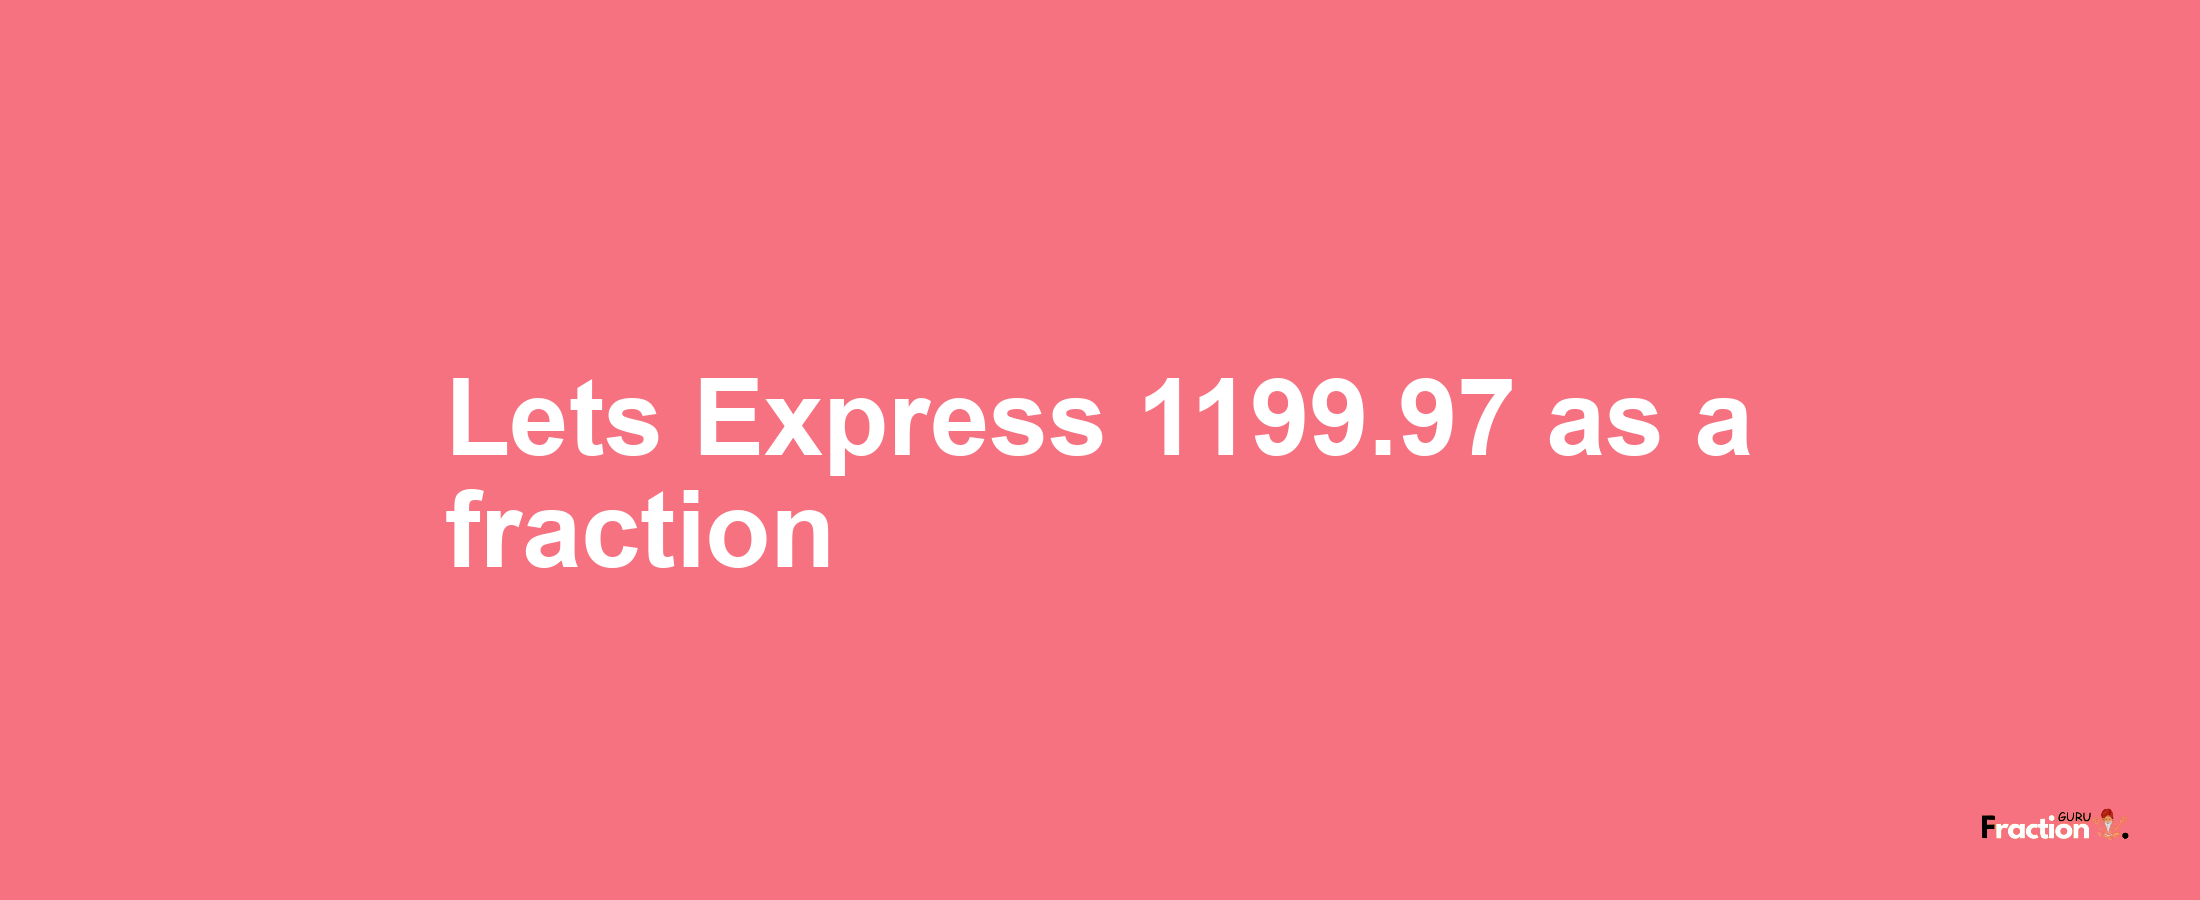 Lets Express 1199.97 as afraction